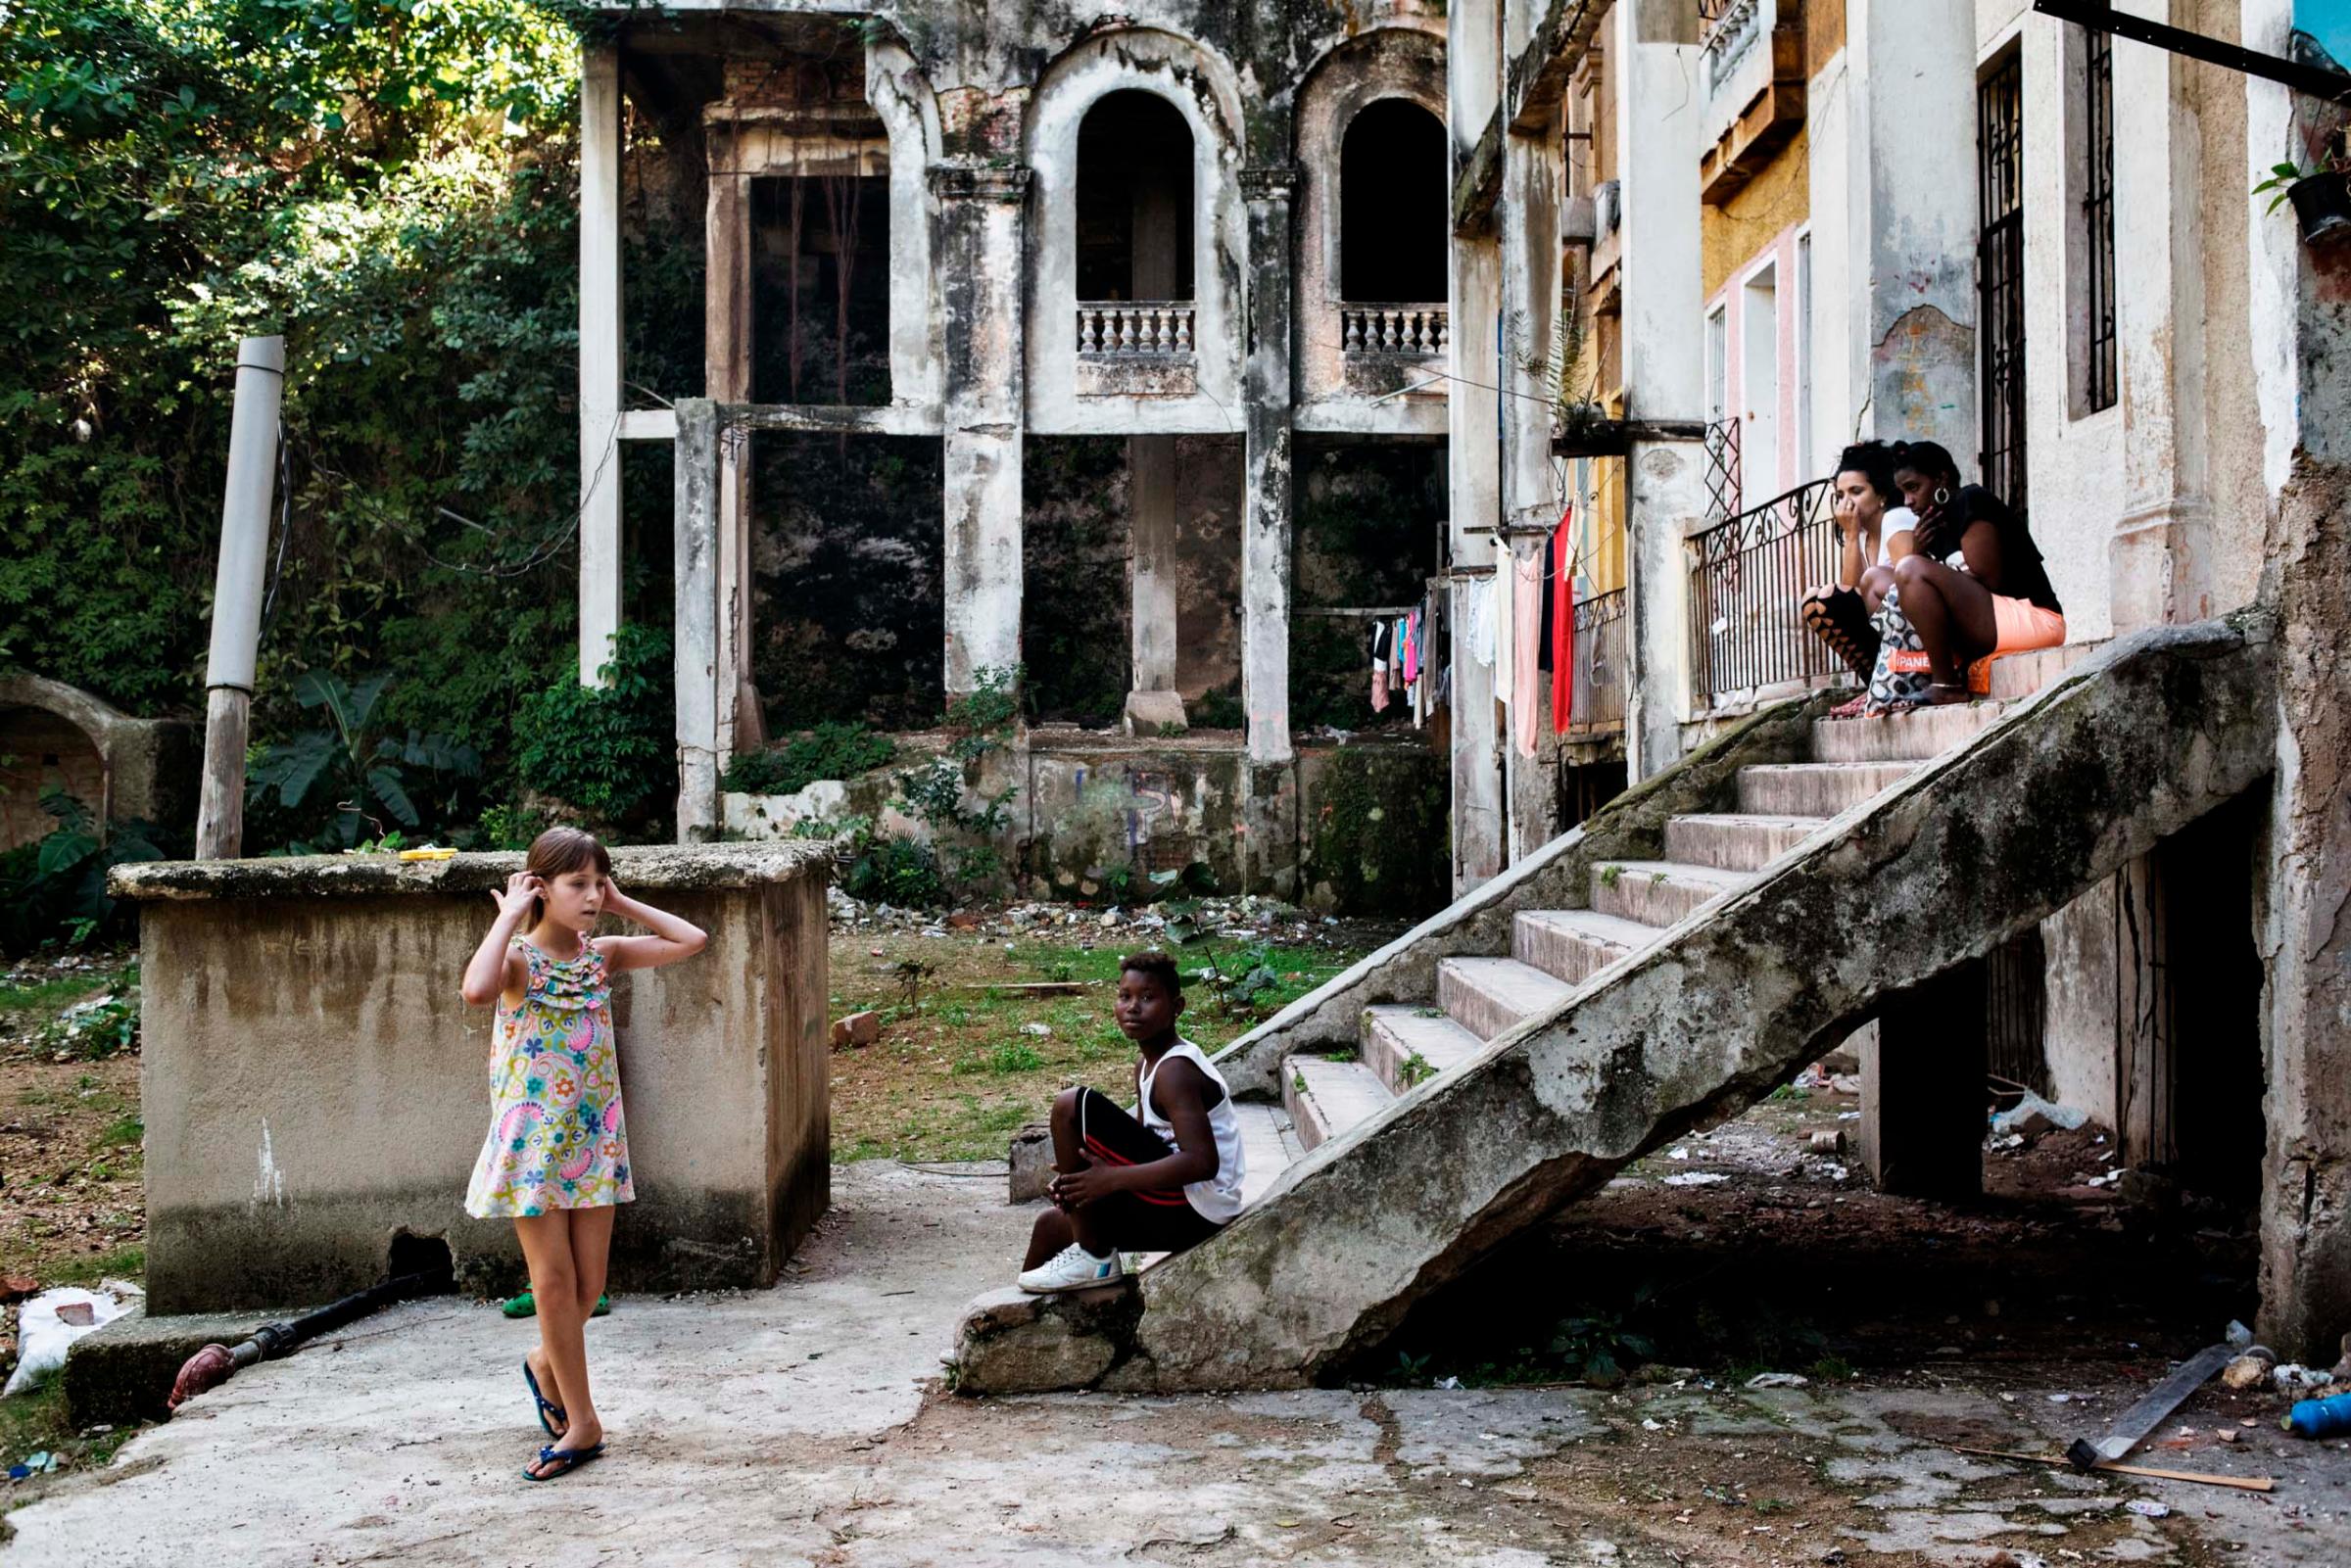 December 2015. Young girls play on the grounds of the Arcos building, an iconic building in the El Vedado neighborhood of Havana.